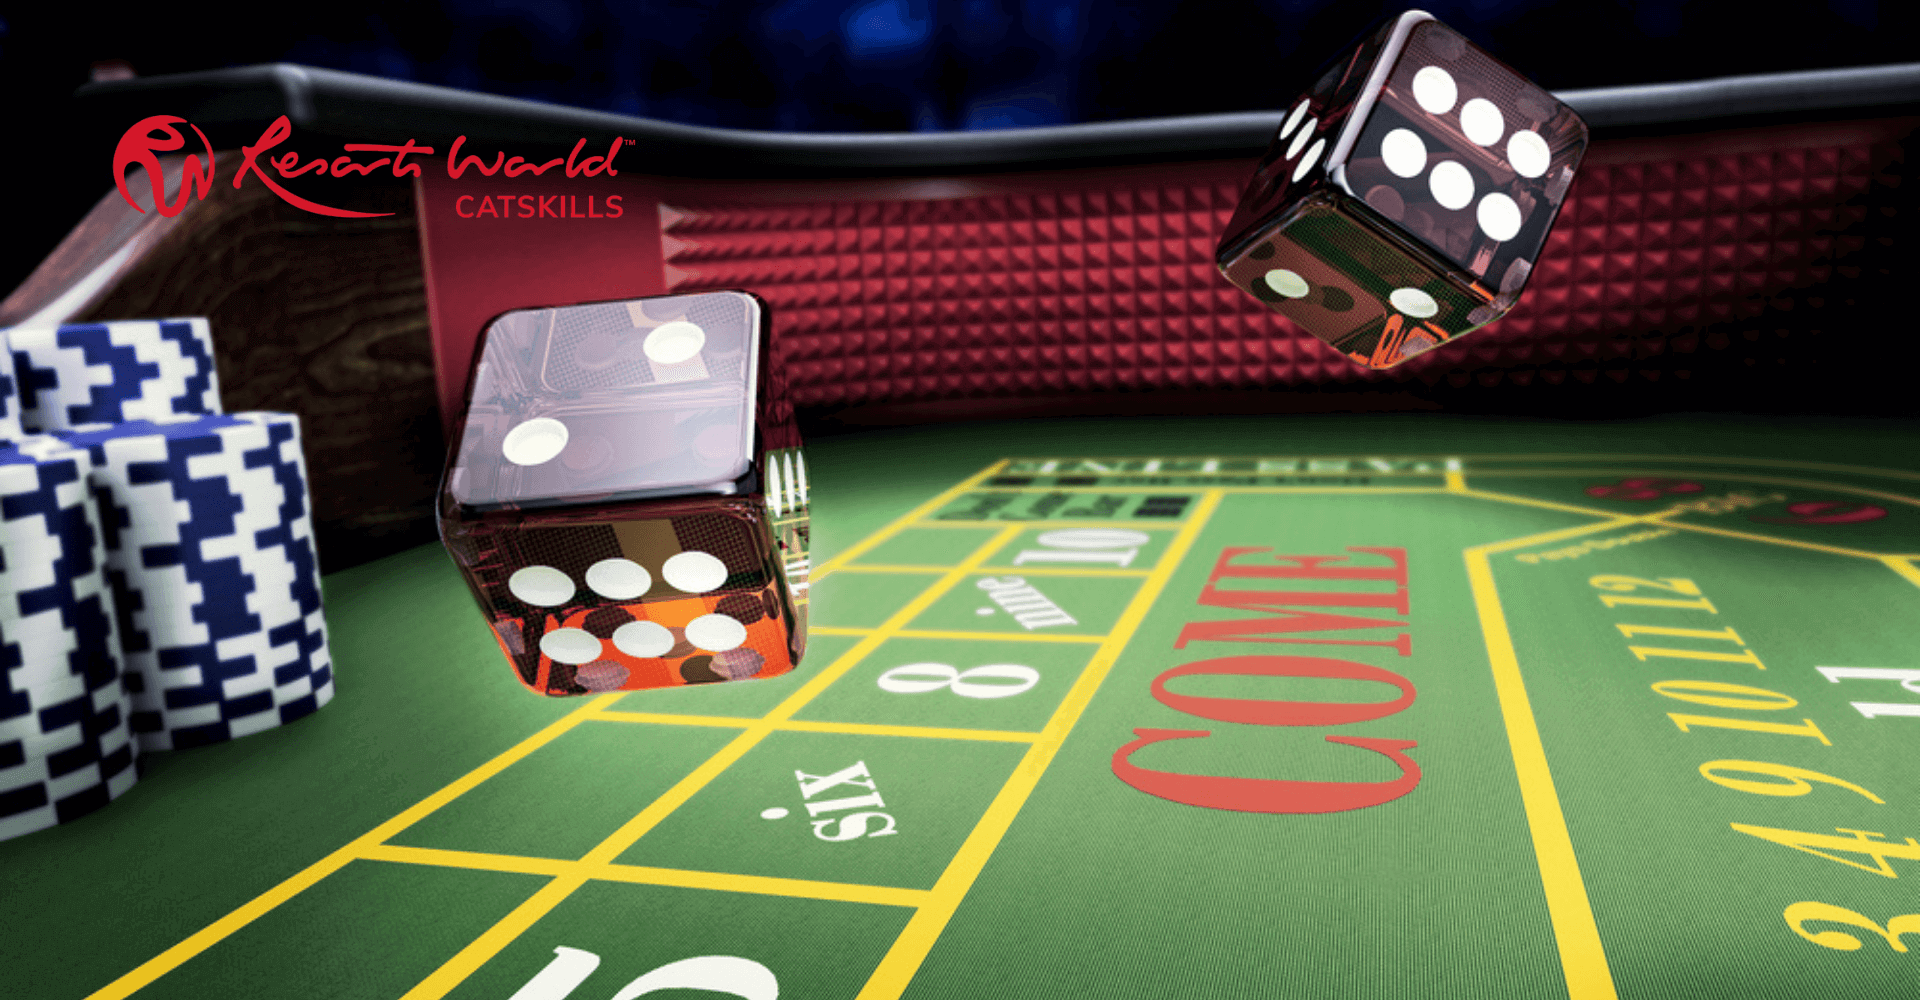 How to Play Craps | Simple Guide | Resorts World Catskills